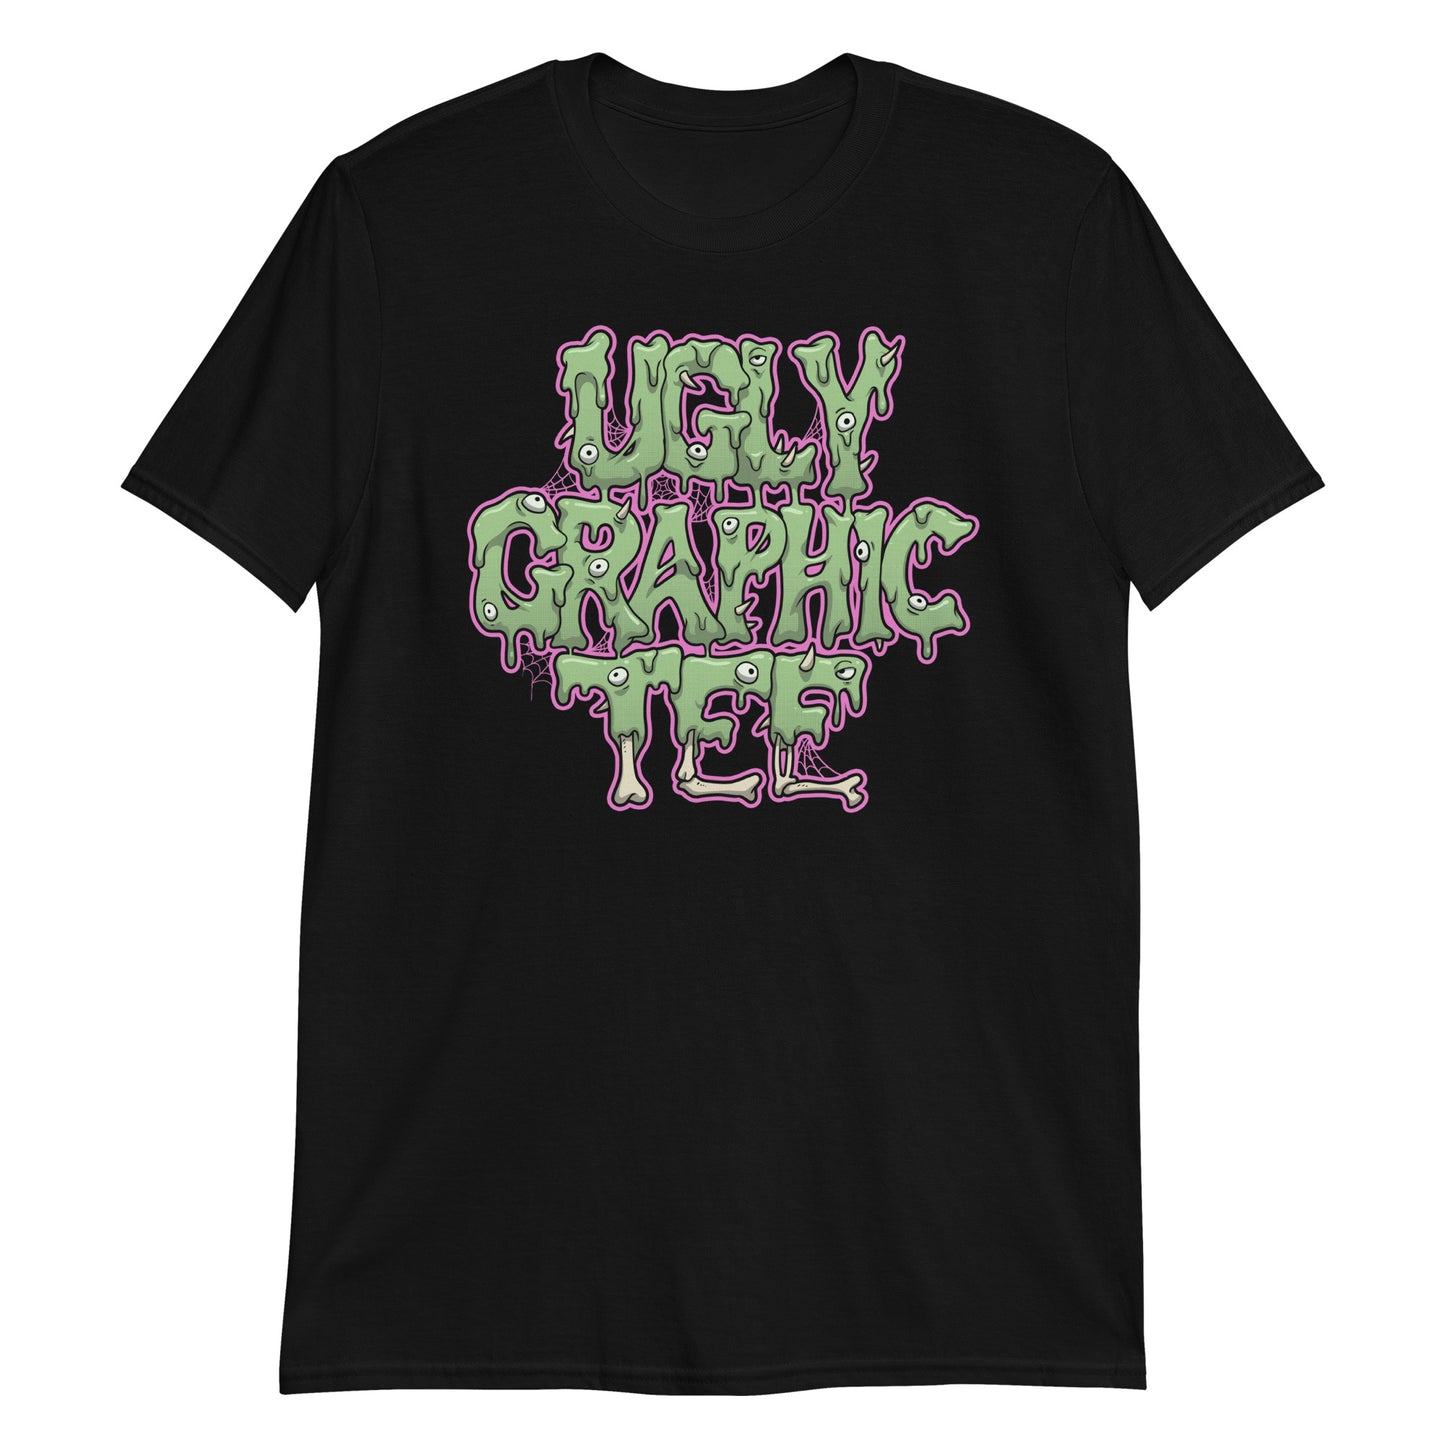 Ugly Graphic Tee t-shirt